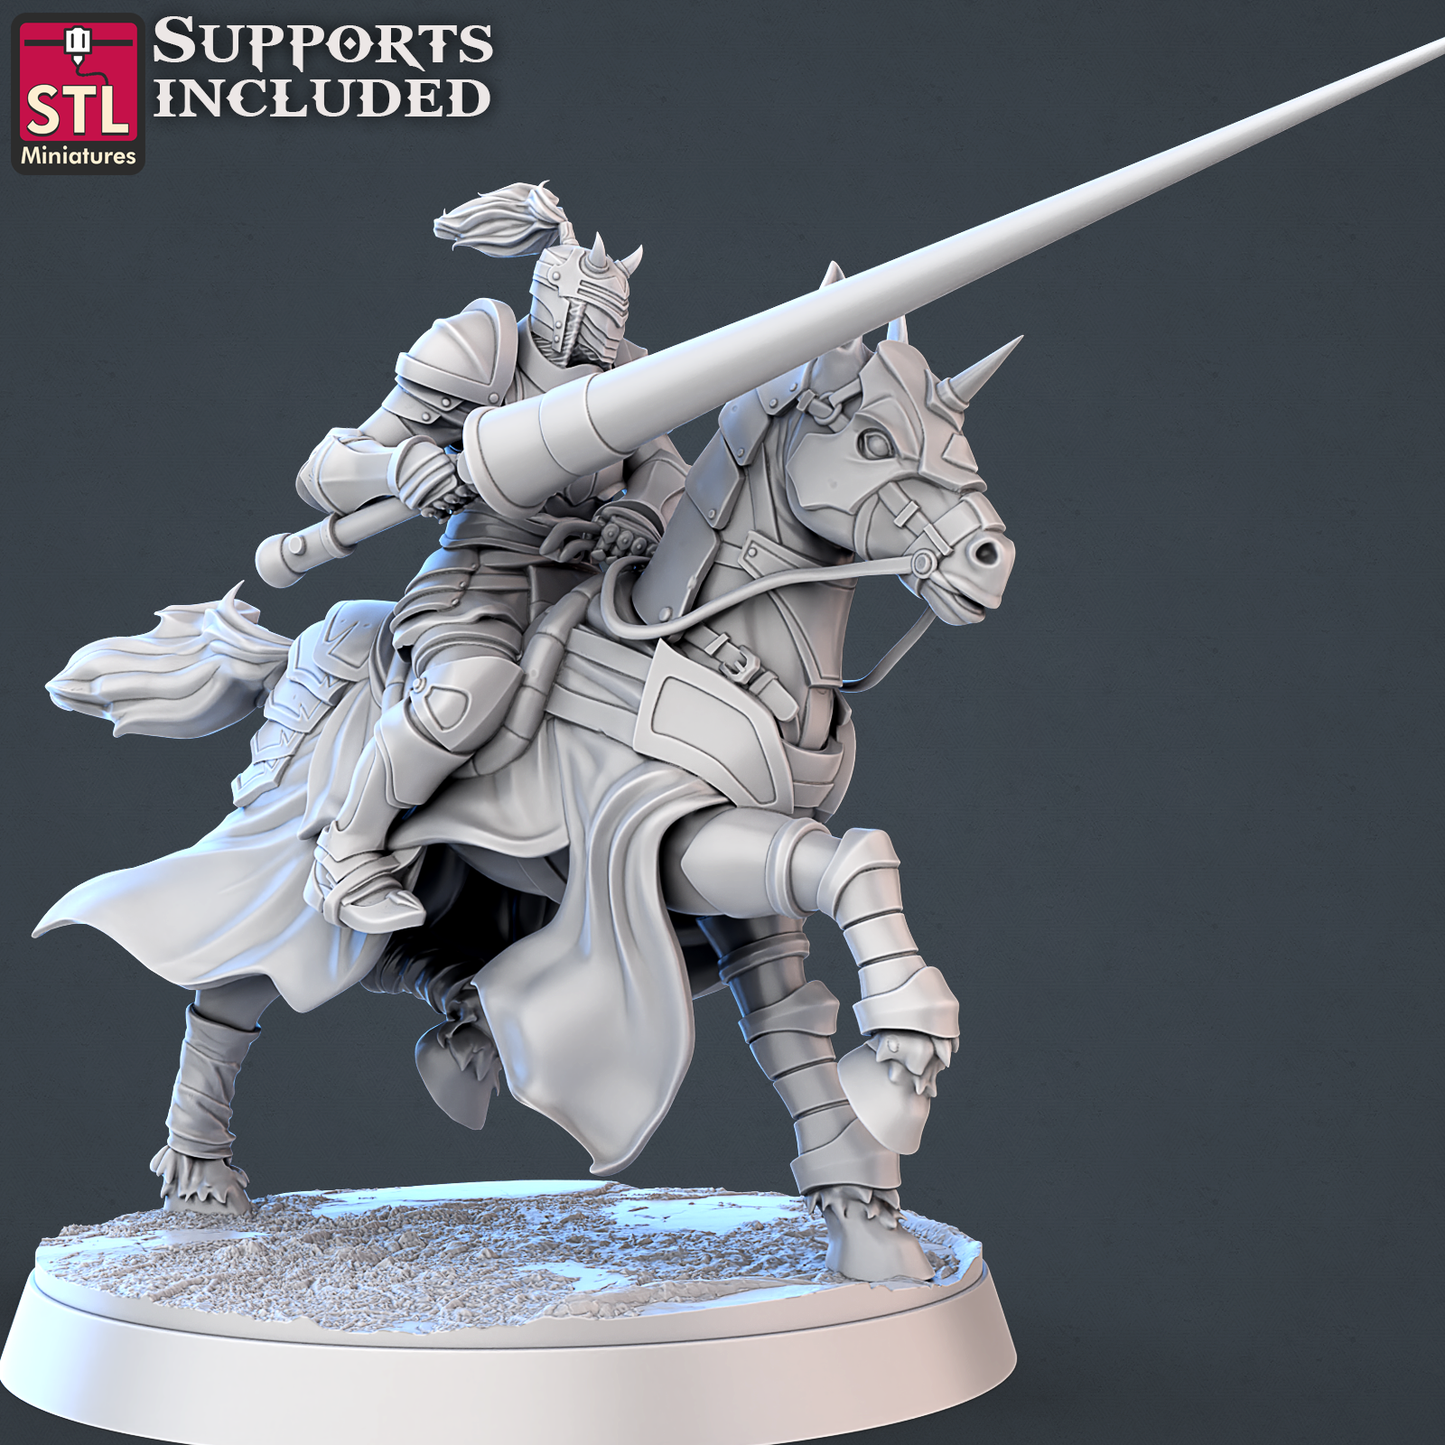 Jousting Knight - Sir Lionel the Valiant